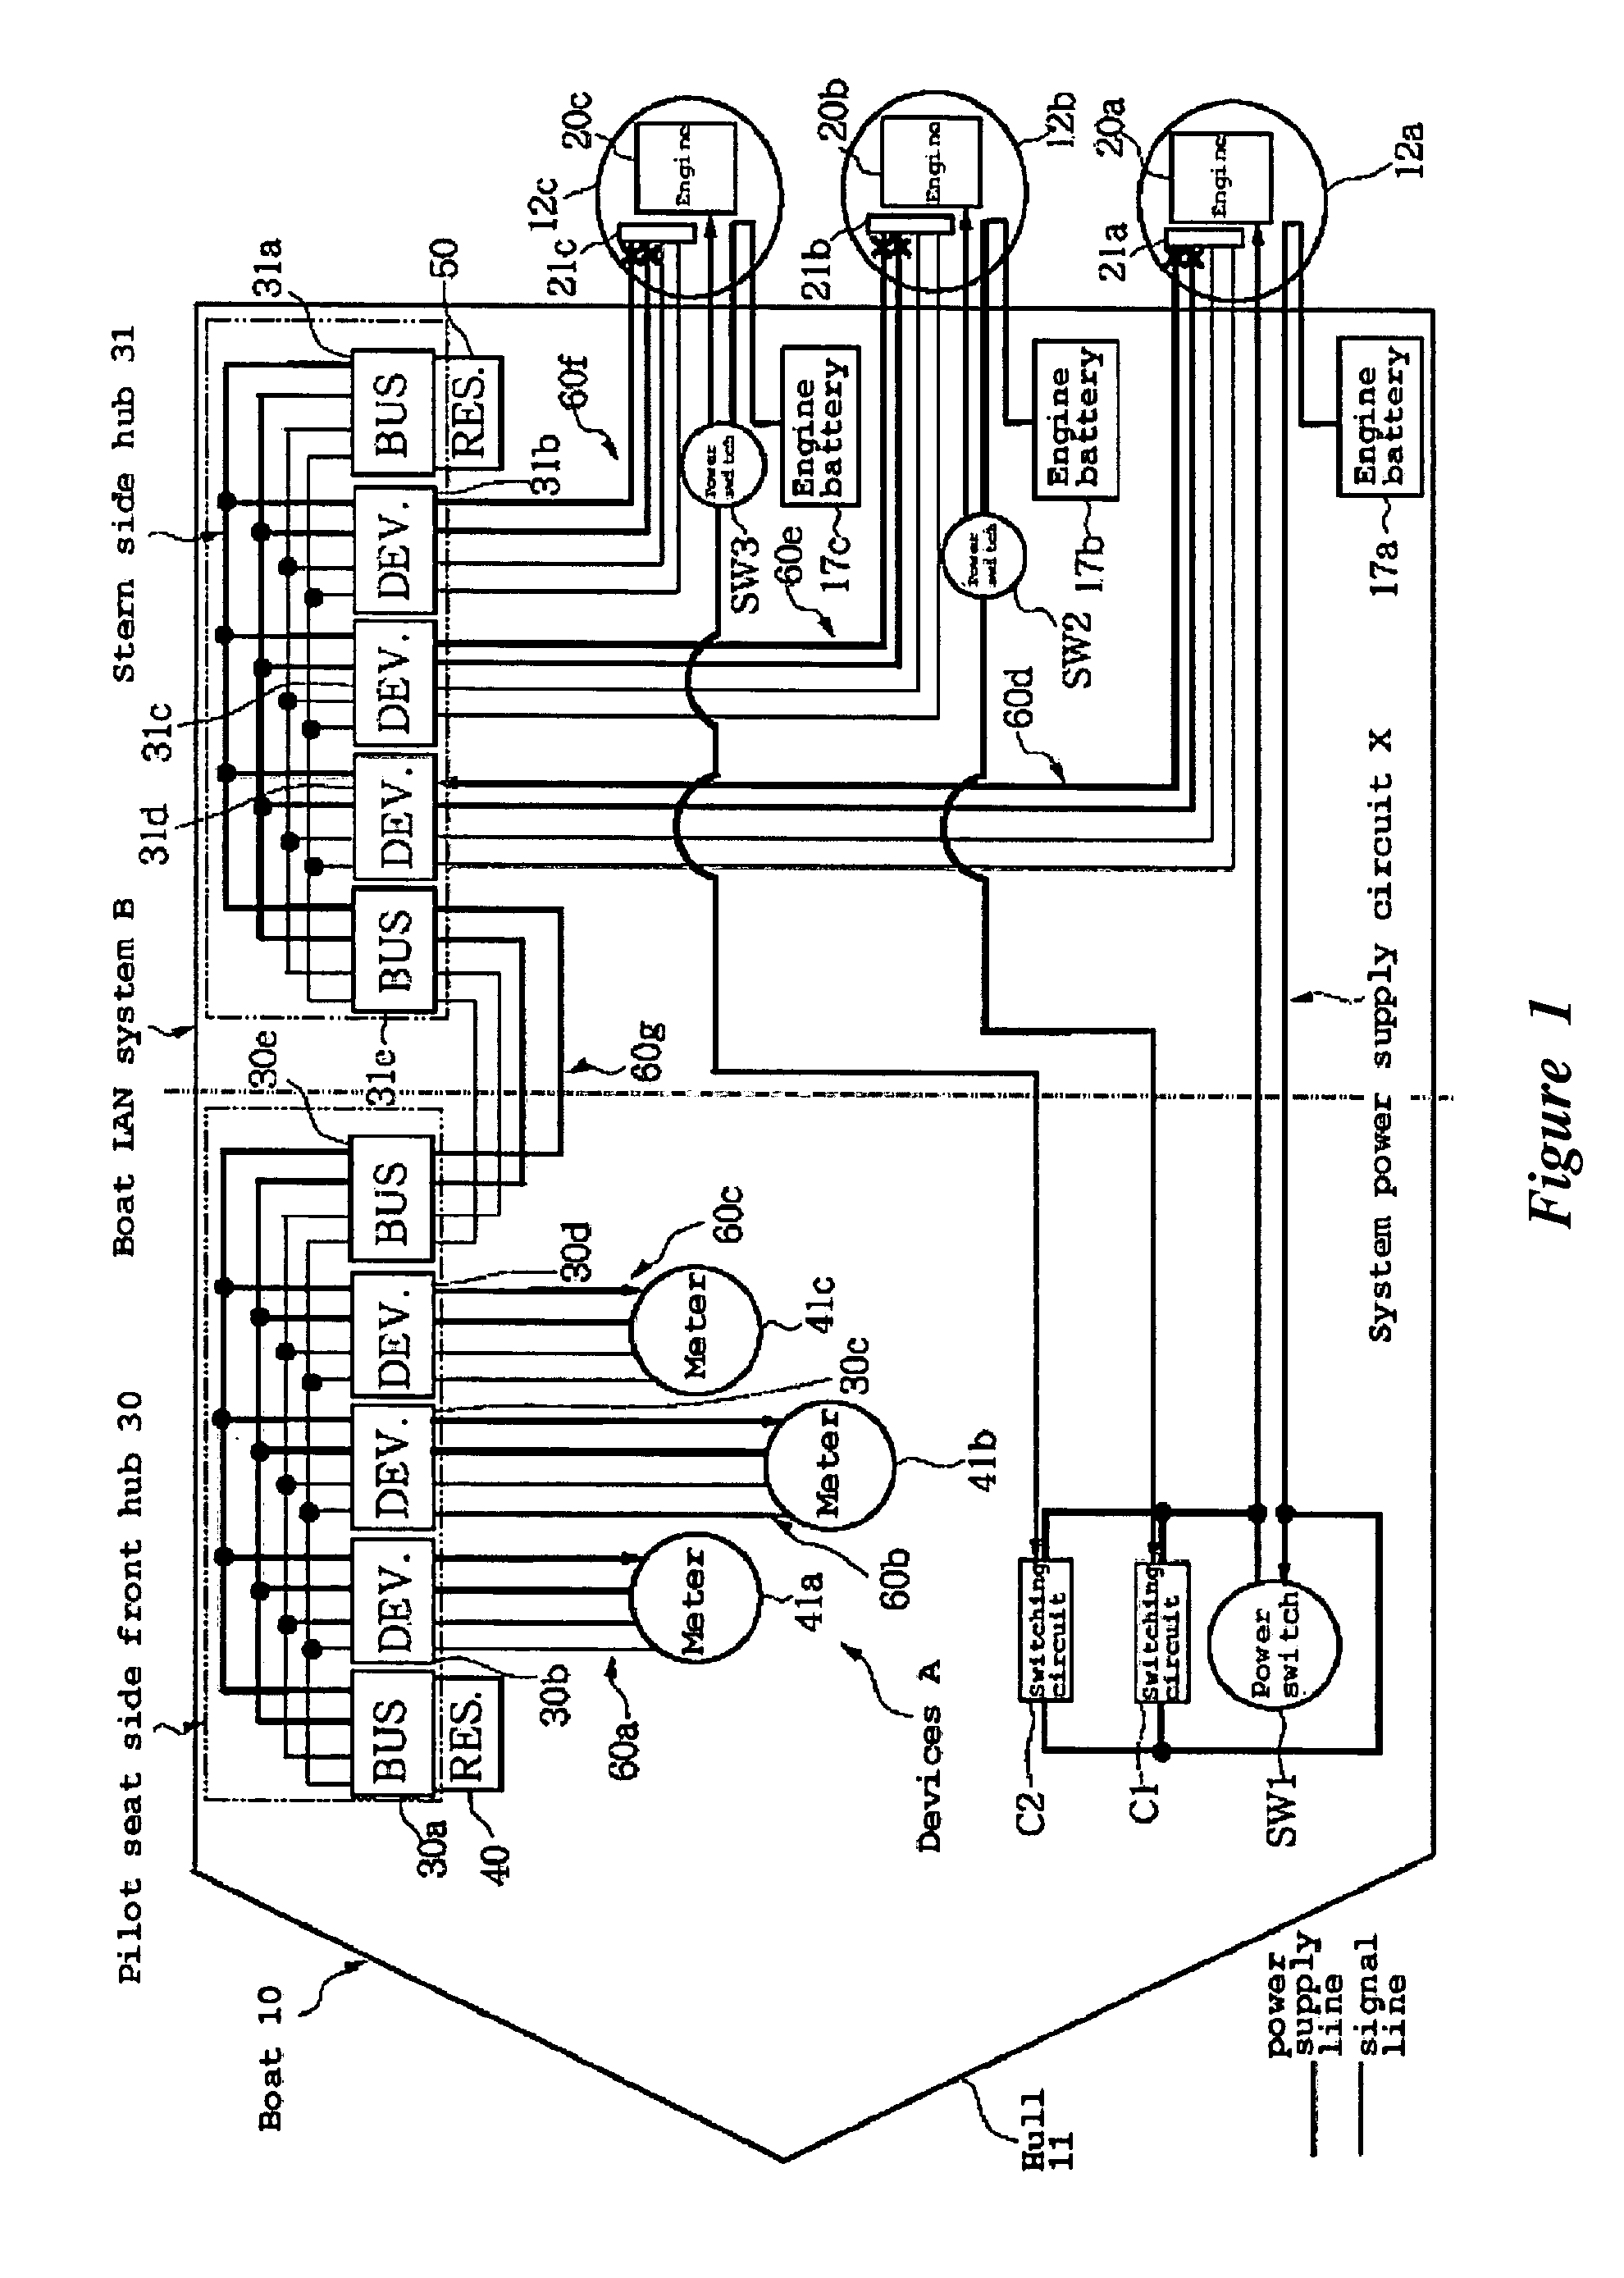 Power supply system for boat LAN system coping with plural engines